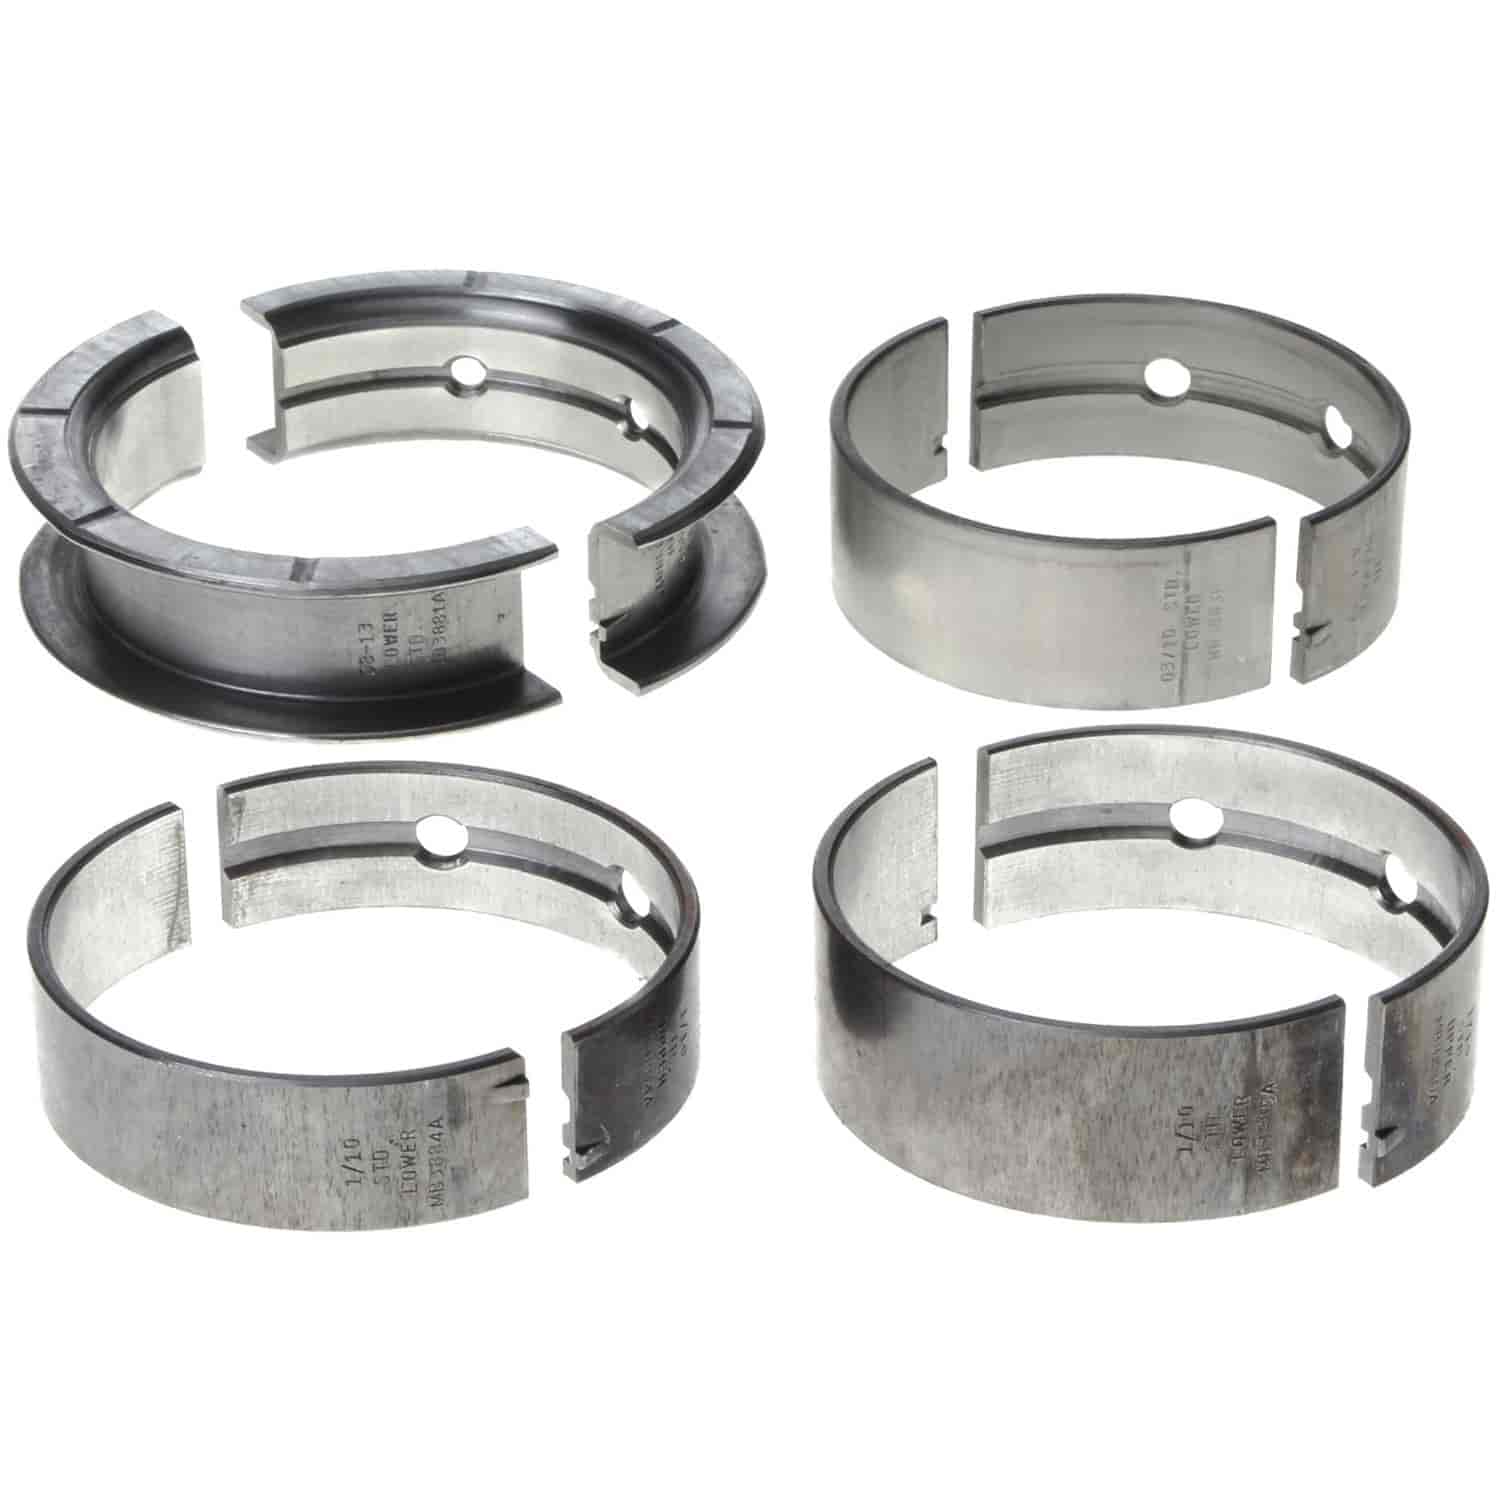 Main Bearing Set Chevy 2006-2011 V6 3.5/3.9L with -.75mm Undersize